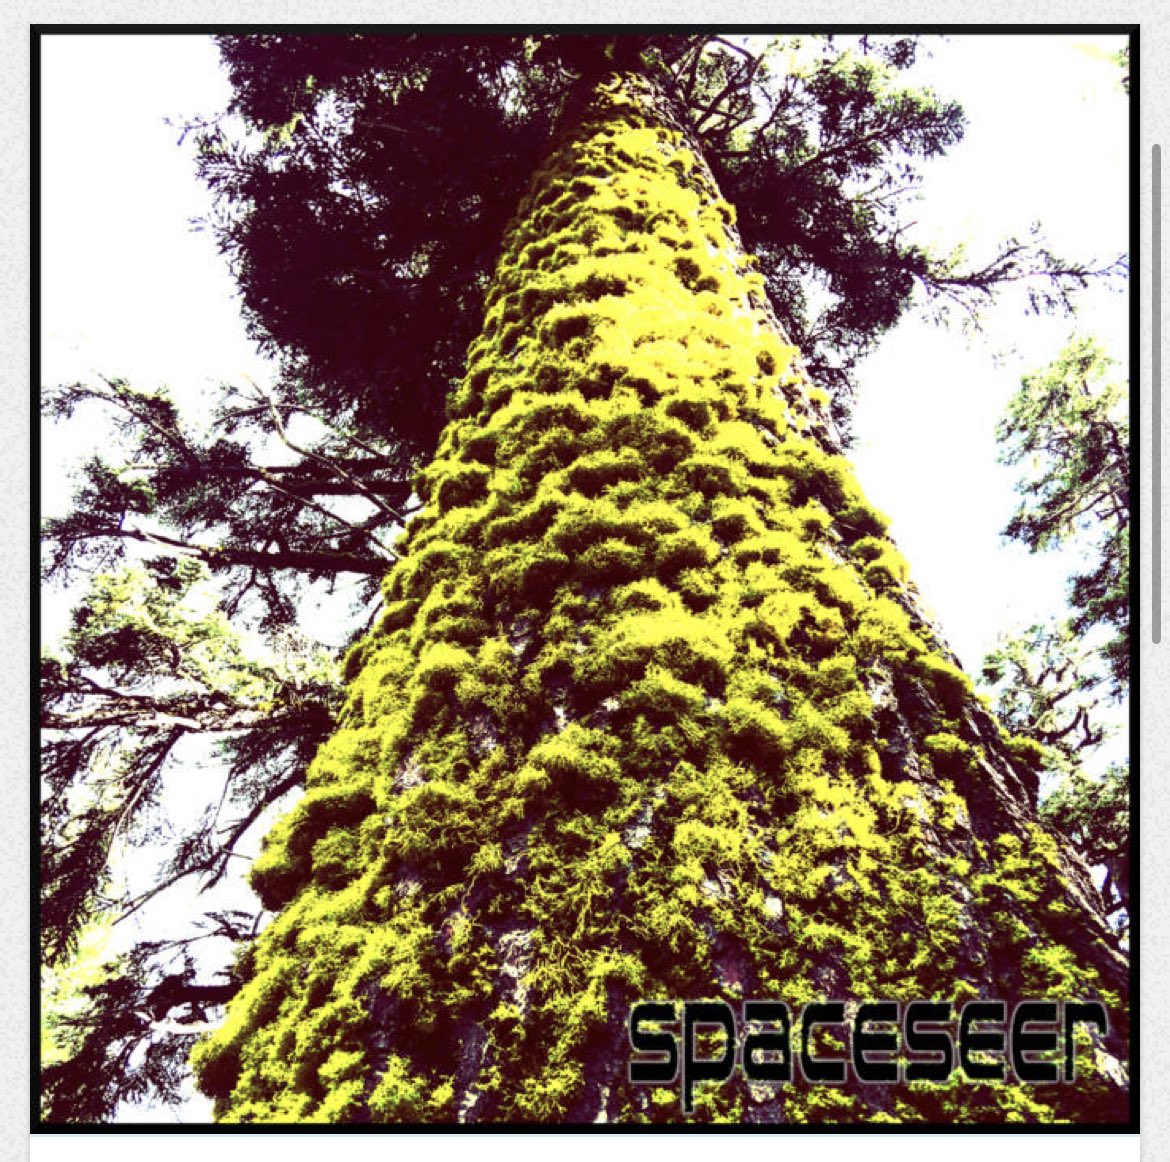 🌲 Towers of the Moss 🌲
has arrived on #bandcamp!
.
spaceseer.bandcamp.com/album/towers-o…
.
.
#berlinschool #moog #sounds #electronica #electronicmusic #synth #doomsynth #darkambient #dungeonsynth #jamuary #trees #moss #liverecording